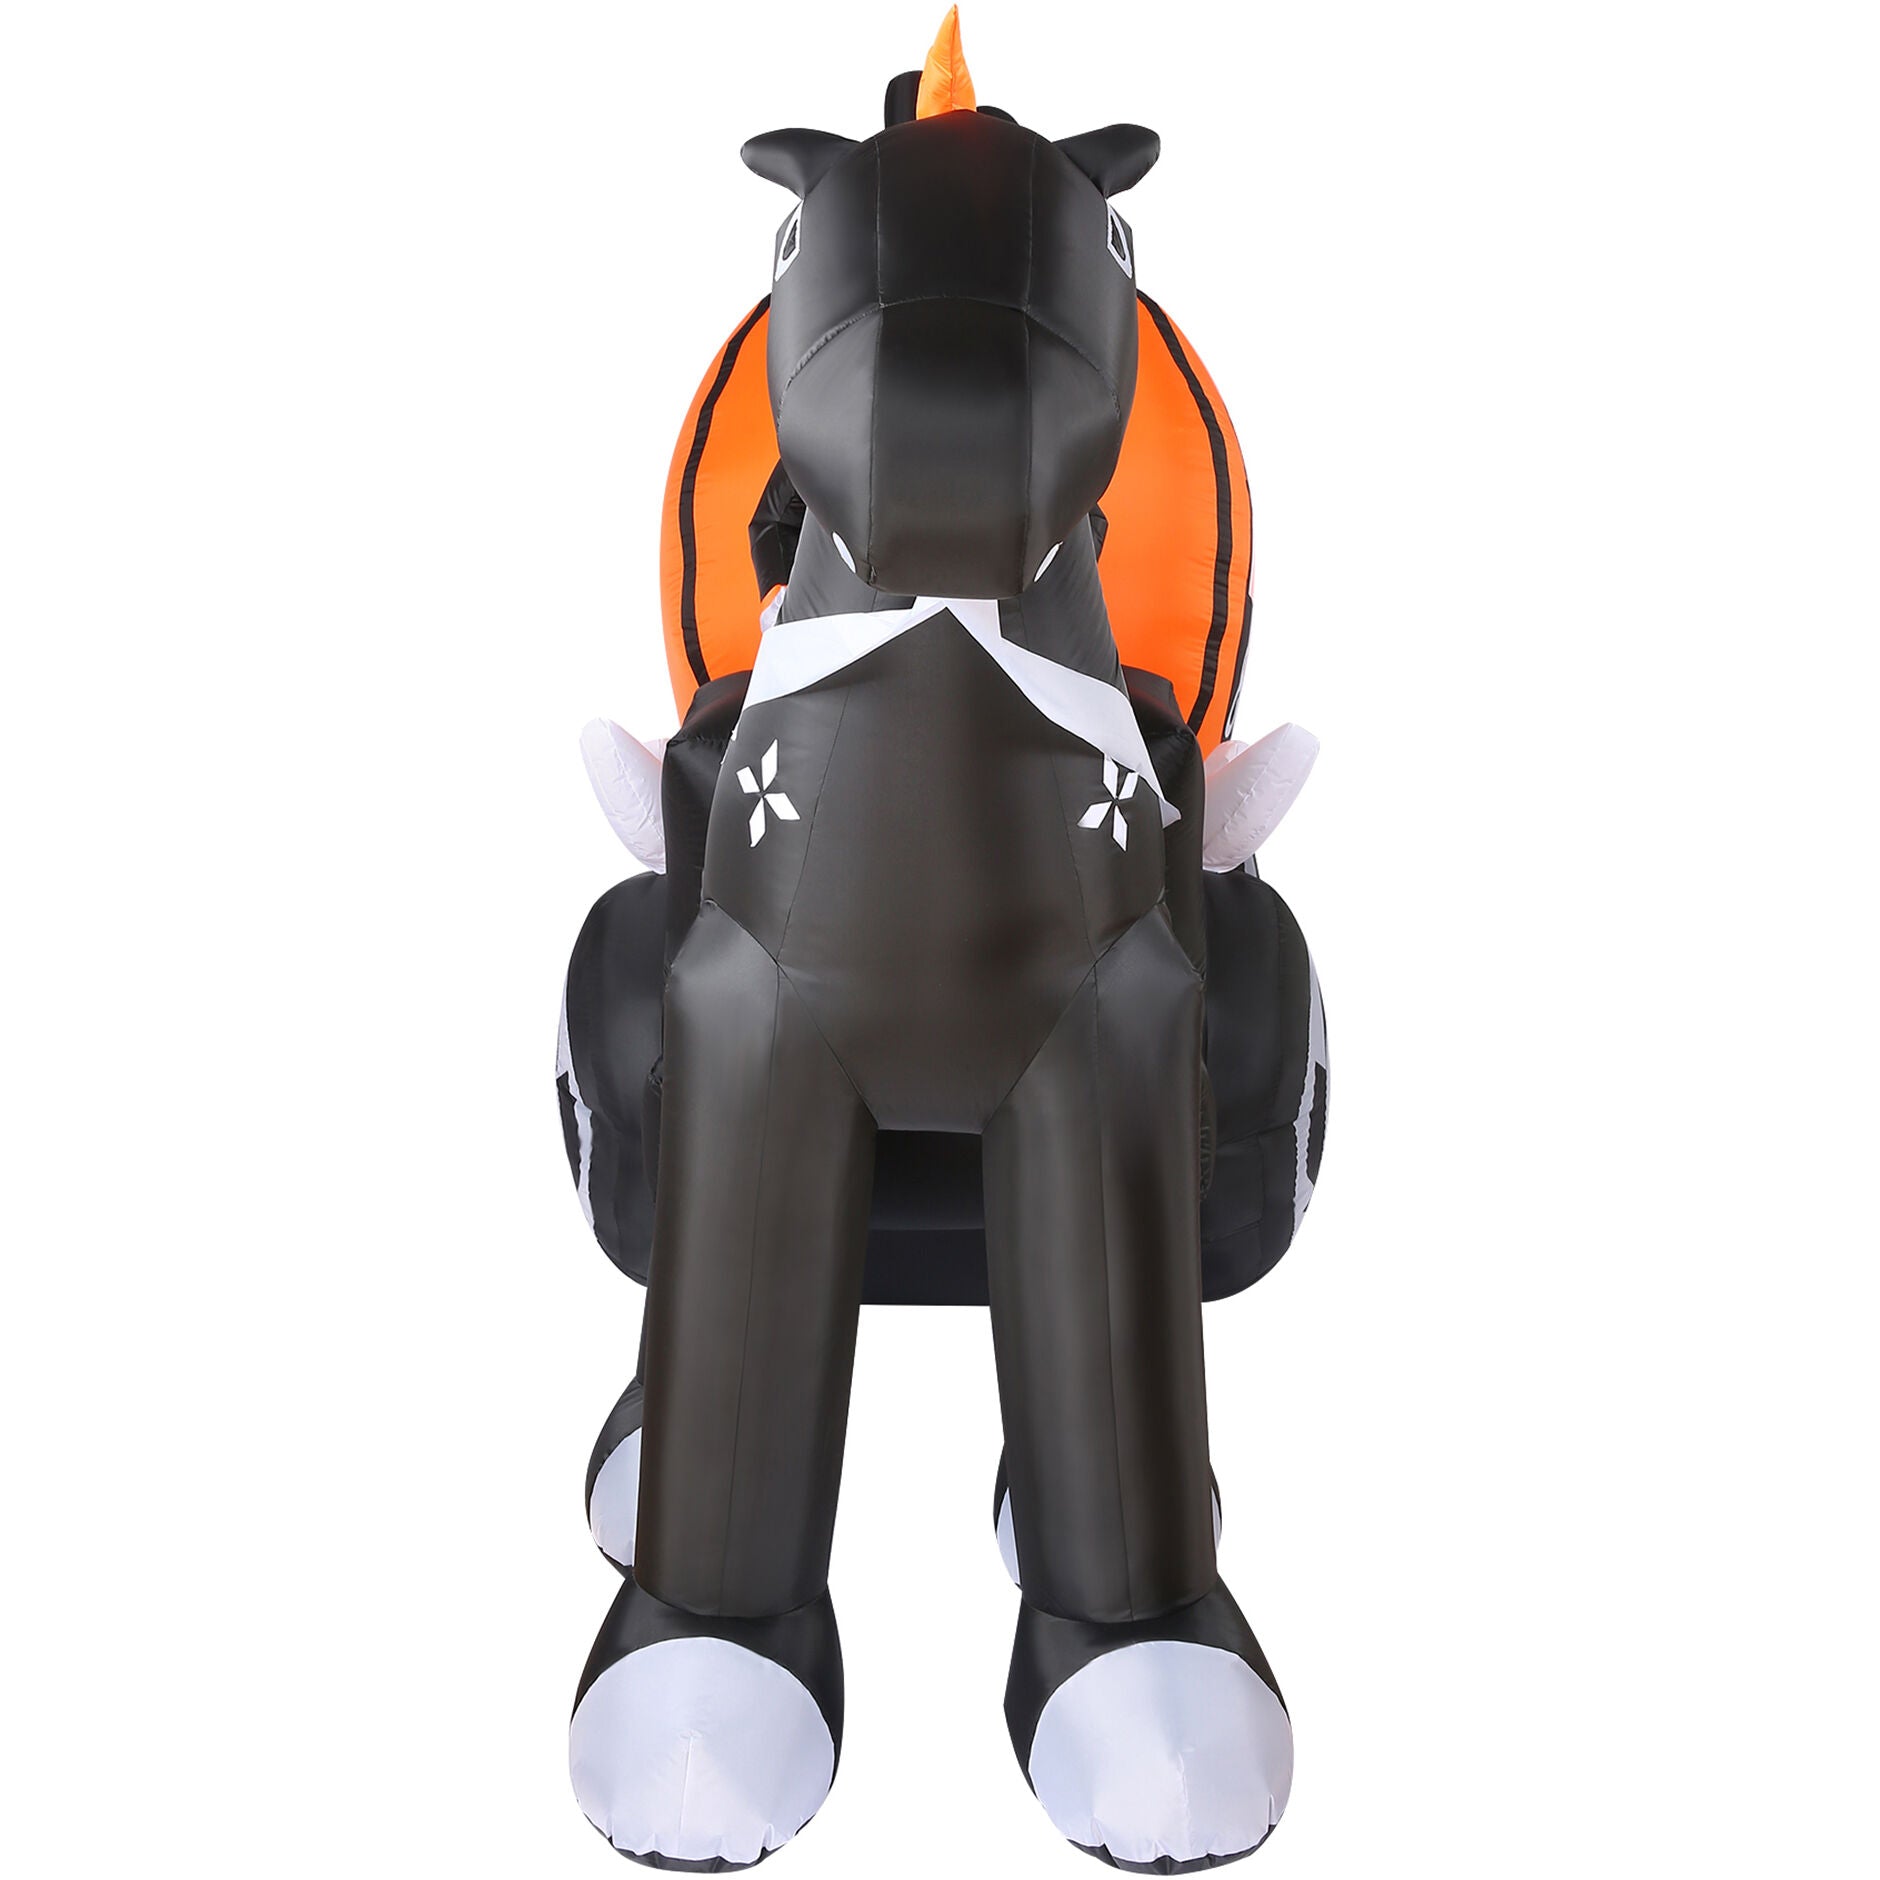 Haunted Hill Farm - 6-Ft. Tall Pre-lit Inflatable Halloween Carriage